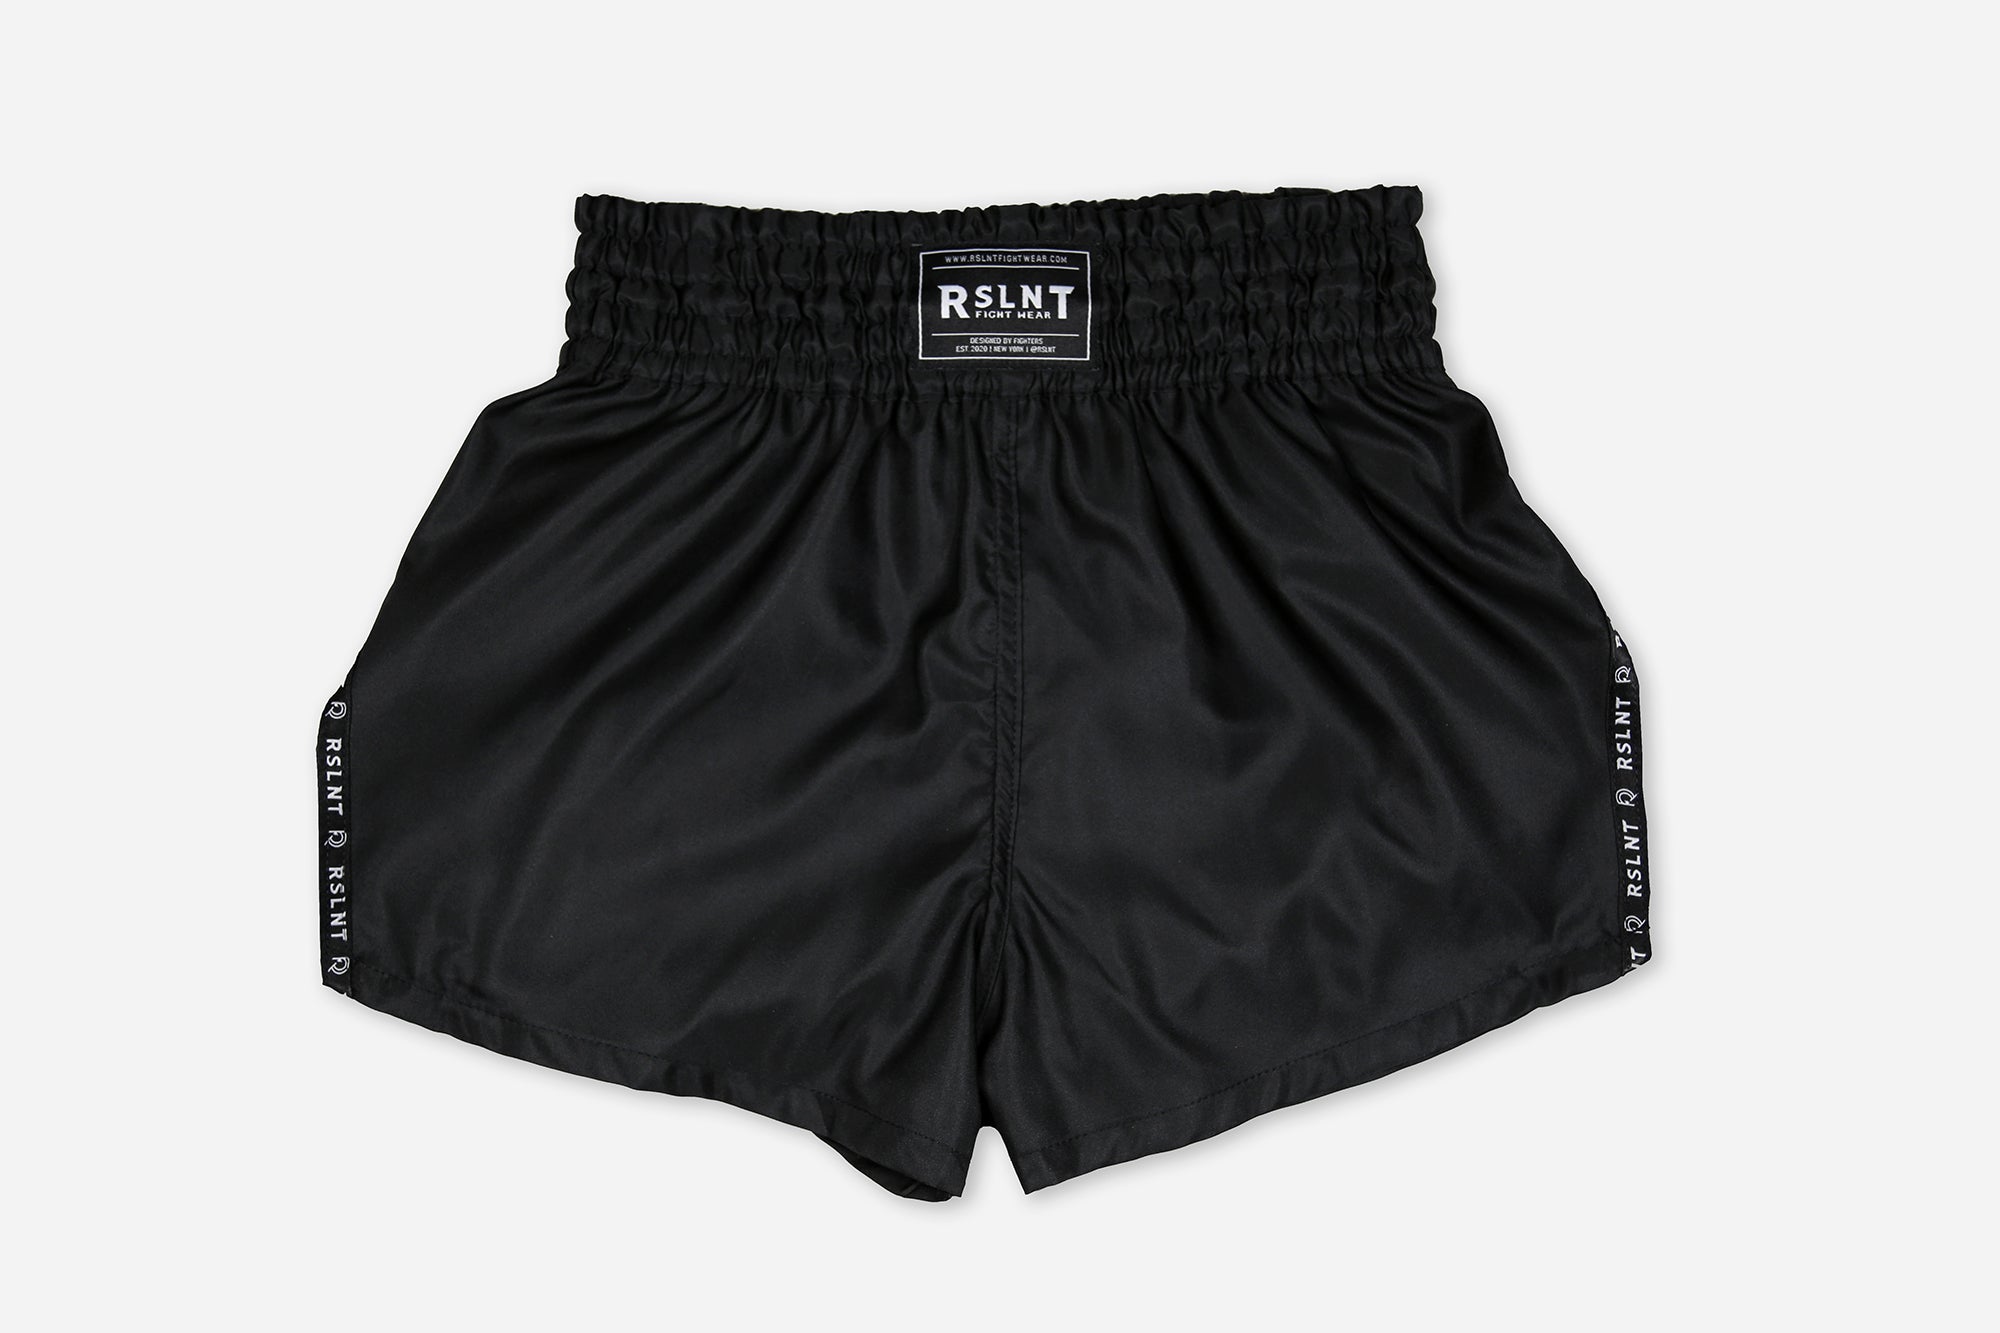 RSLNT Fight Wear - Muay Thai Shorts and Equipment - Athletic Wear